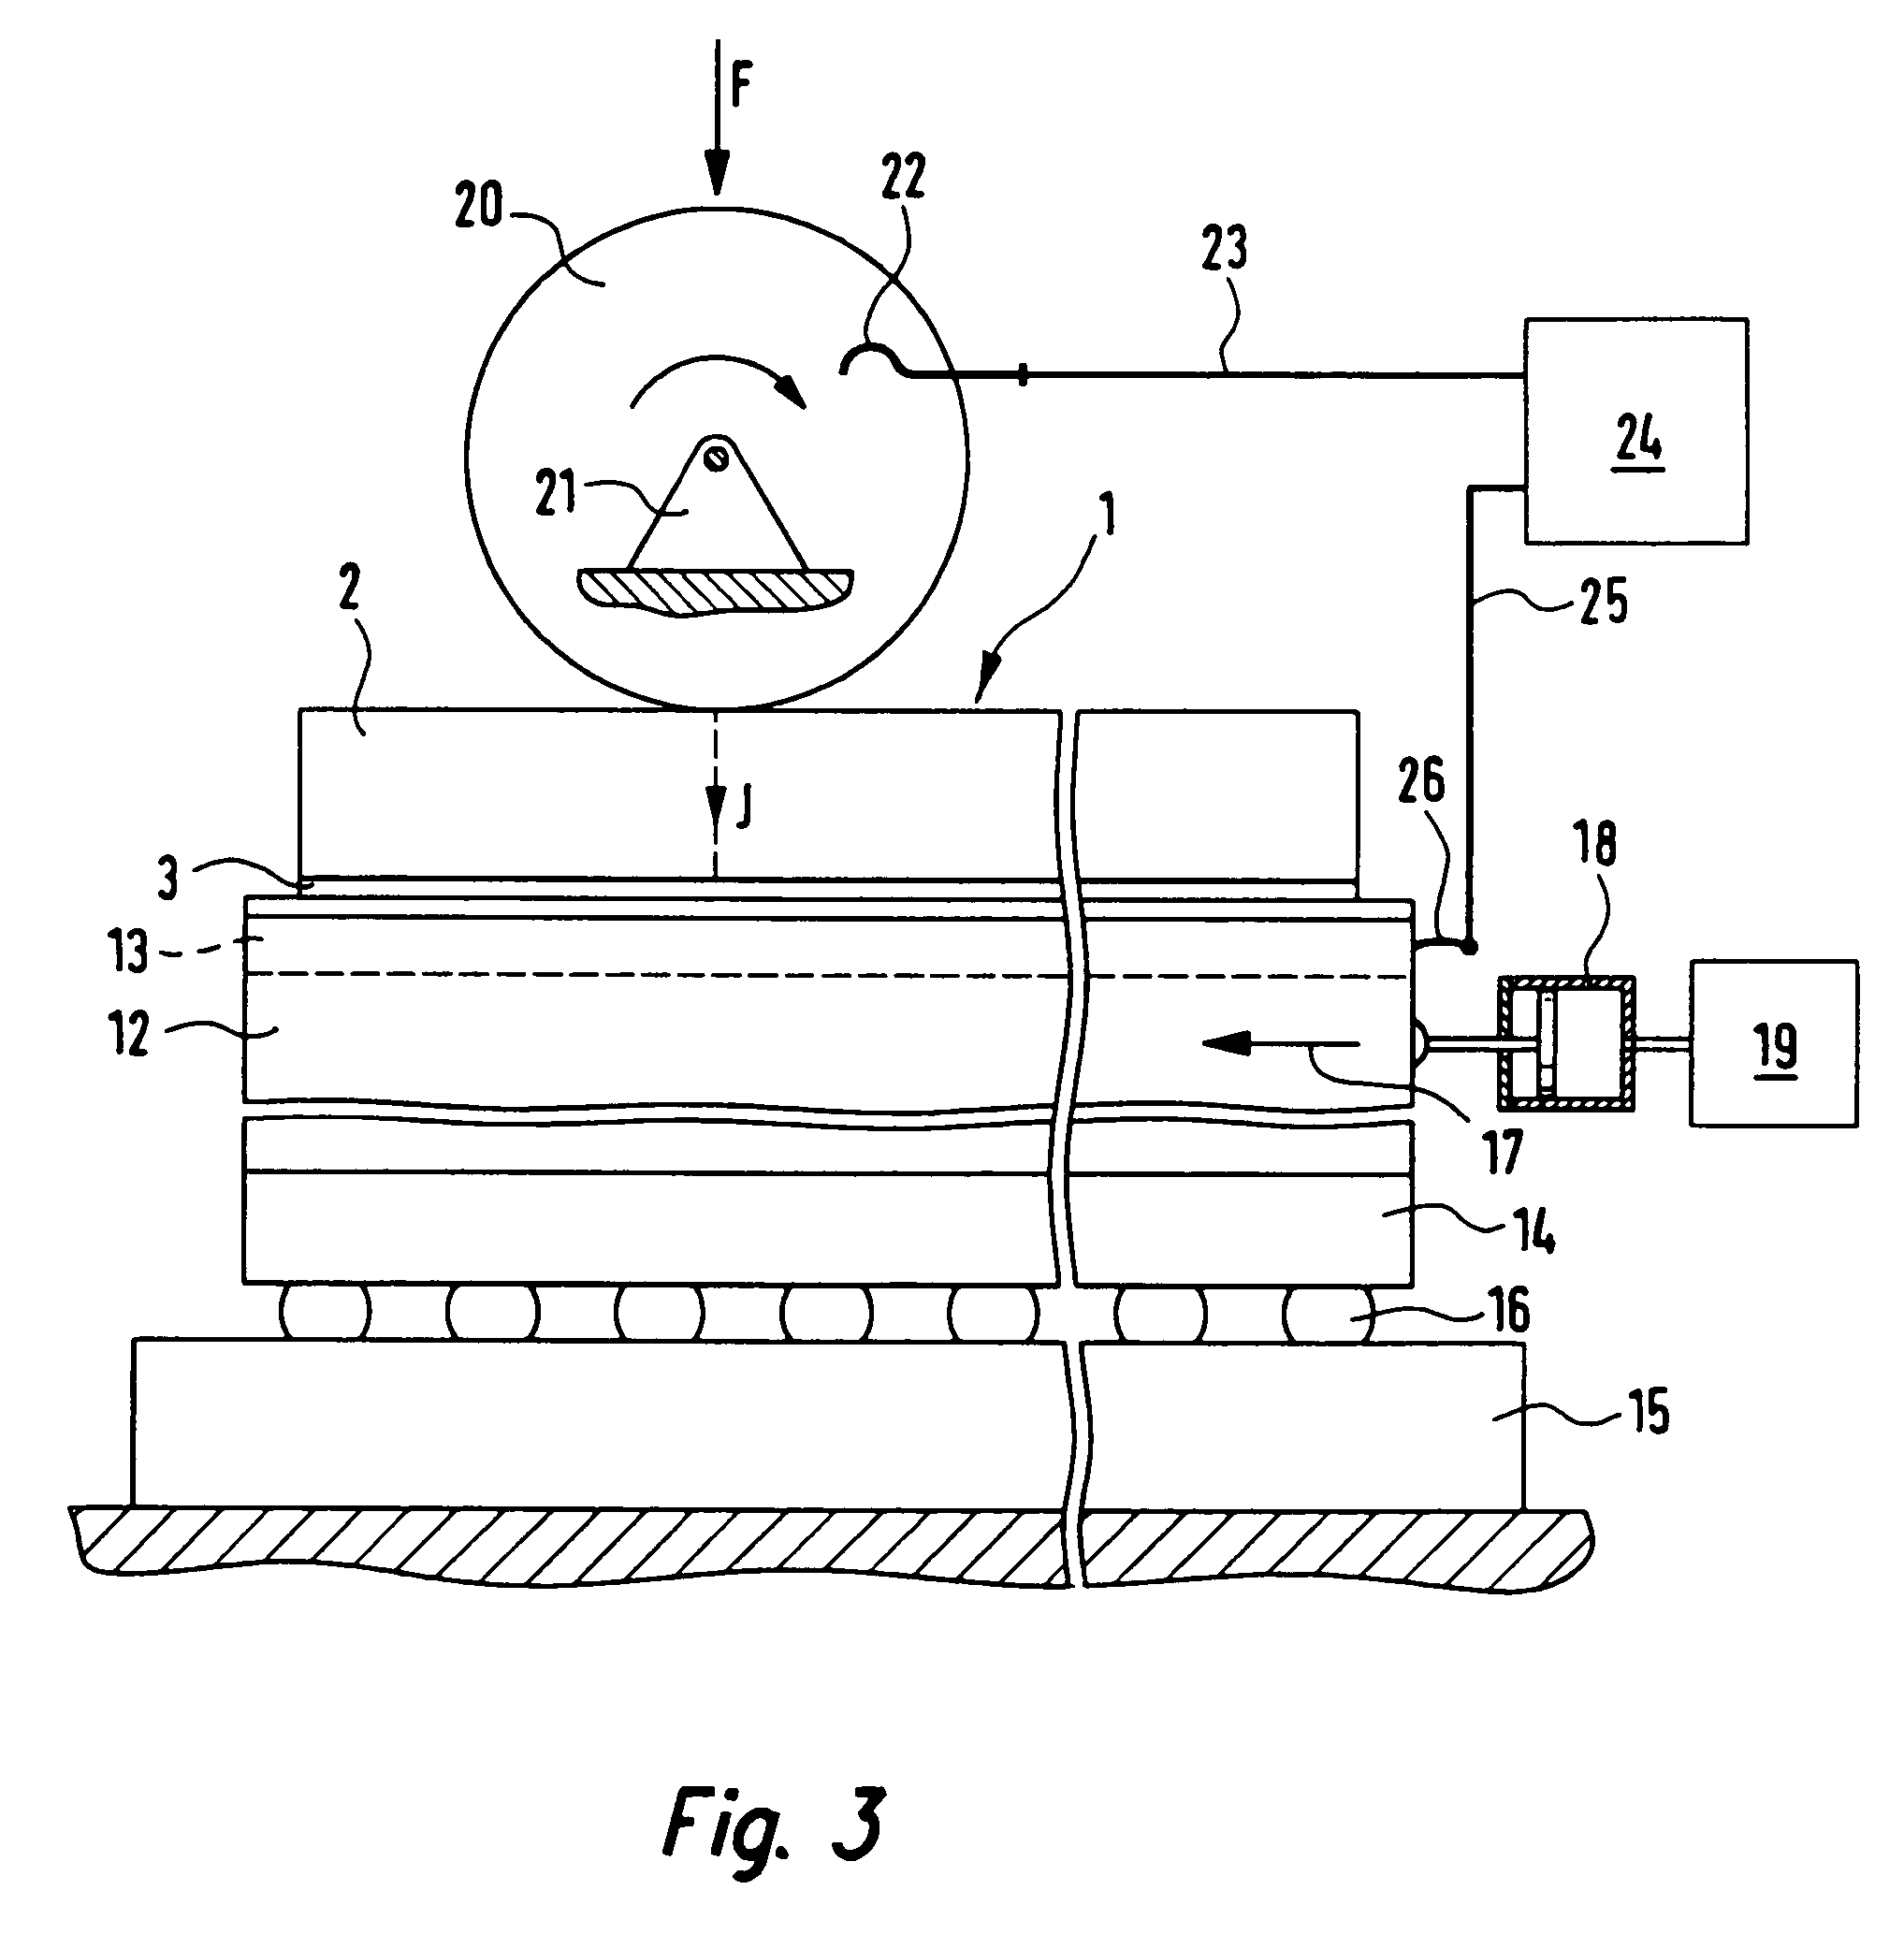 Method and system for resistance seam welding of a foil and at least one foil support of a fuel cell system